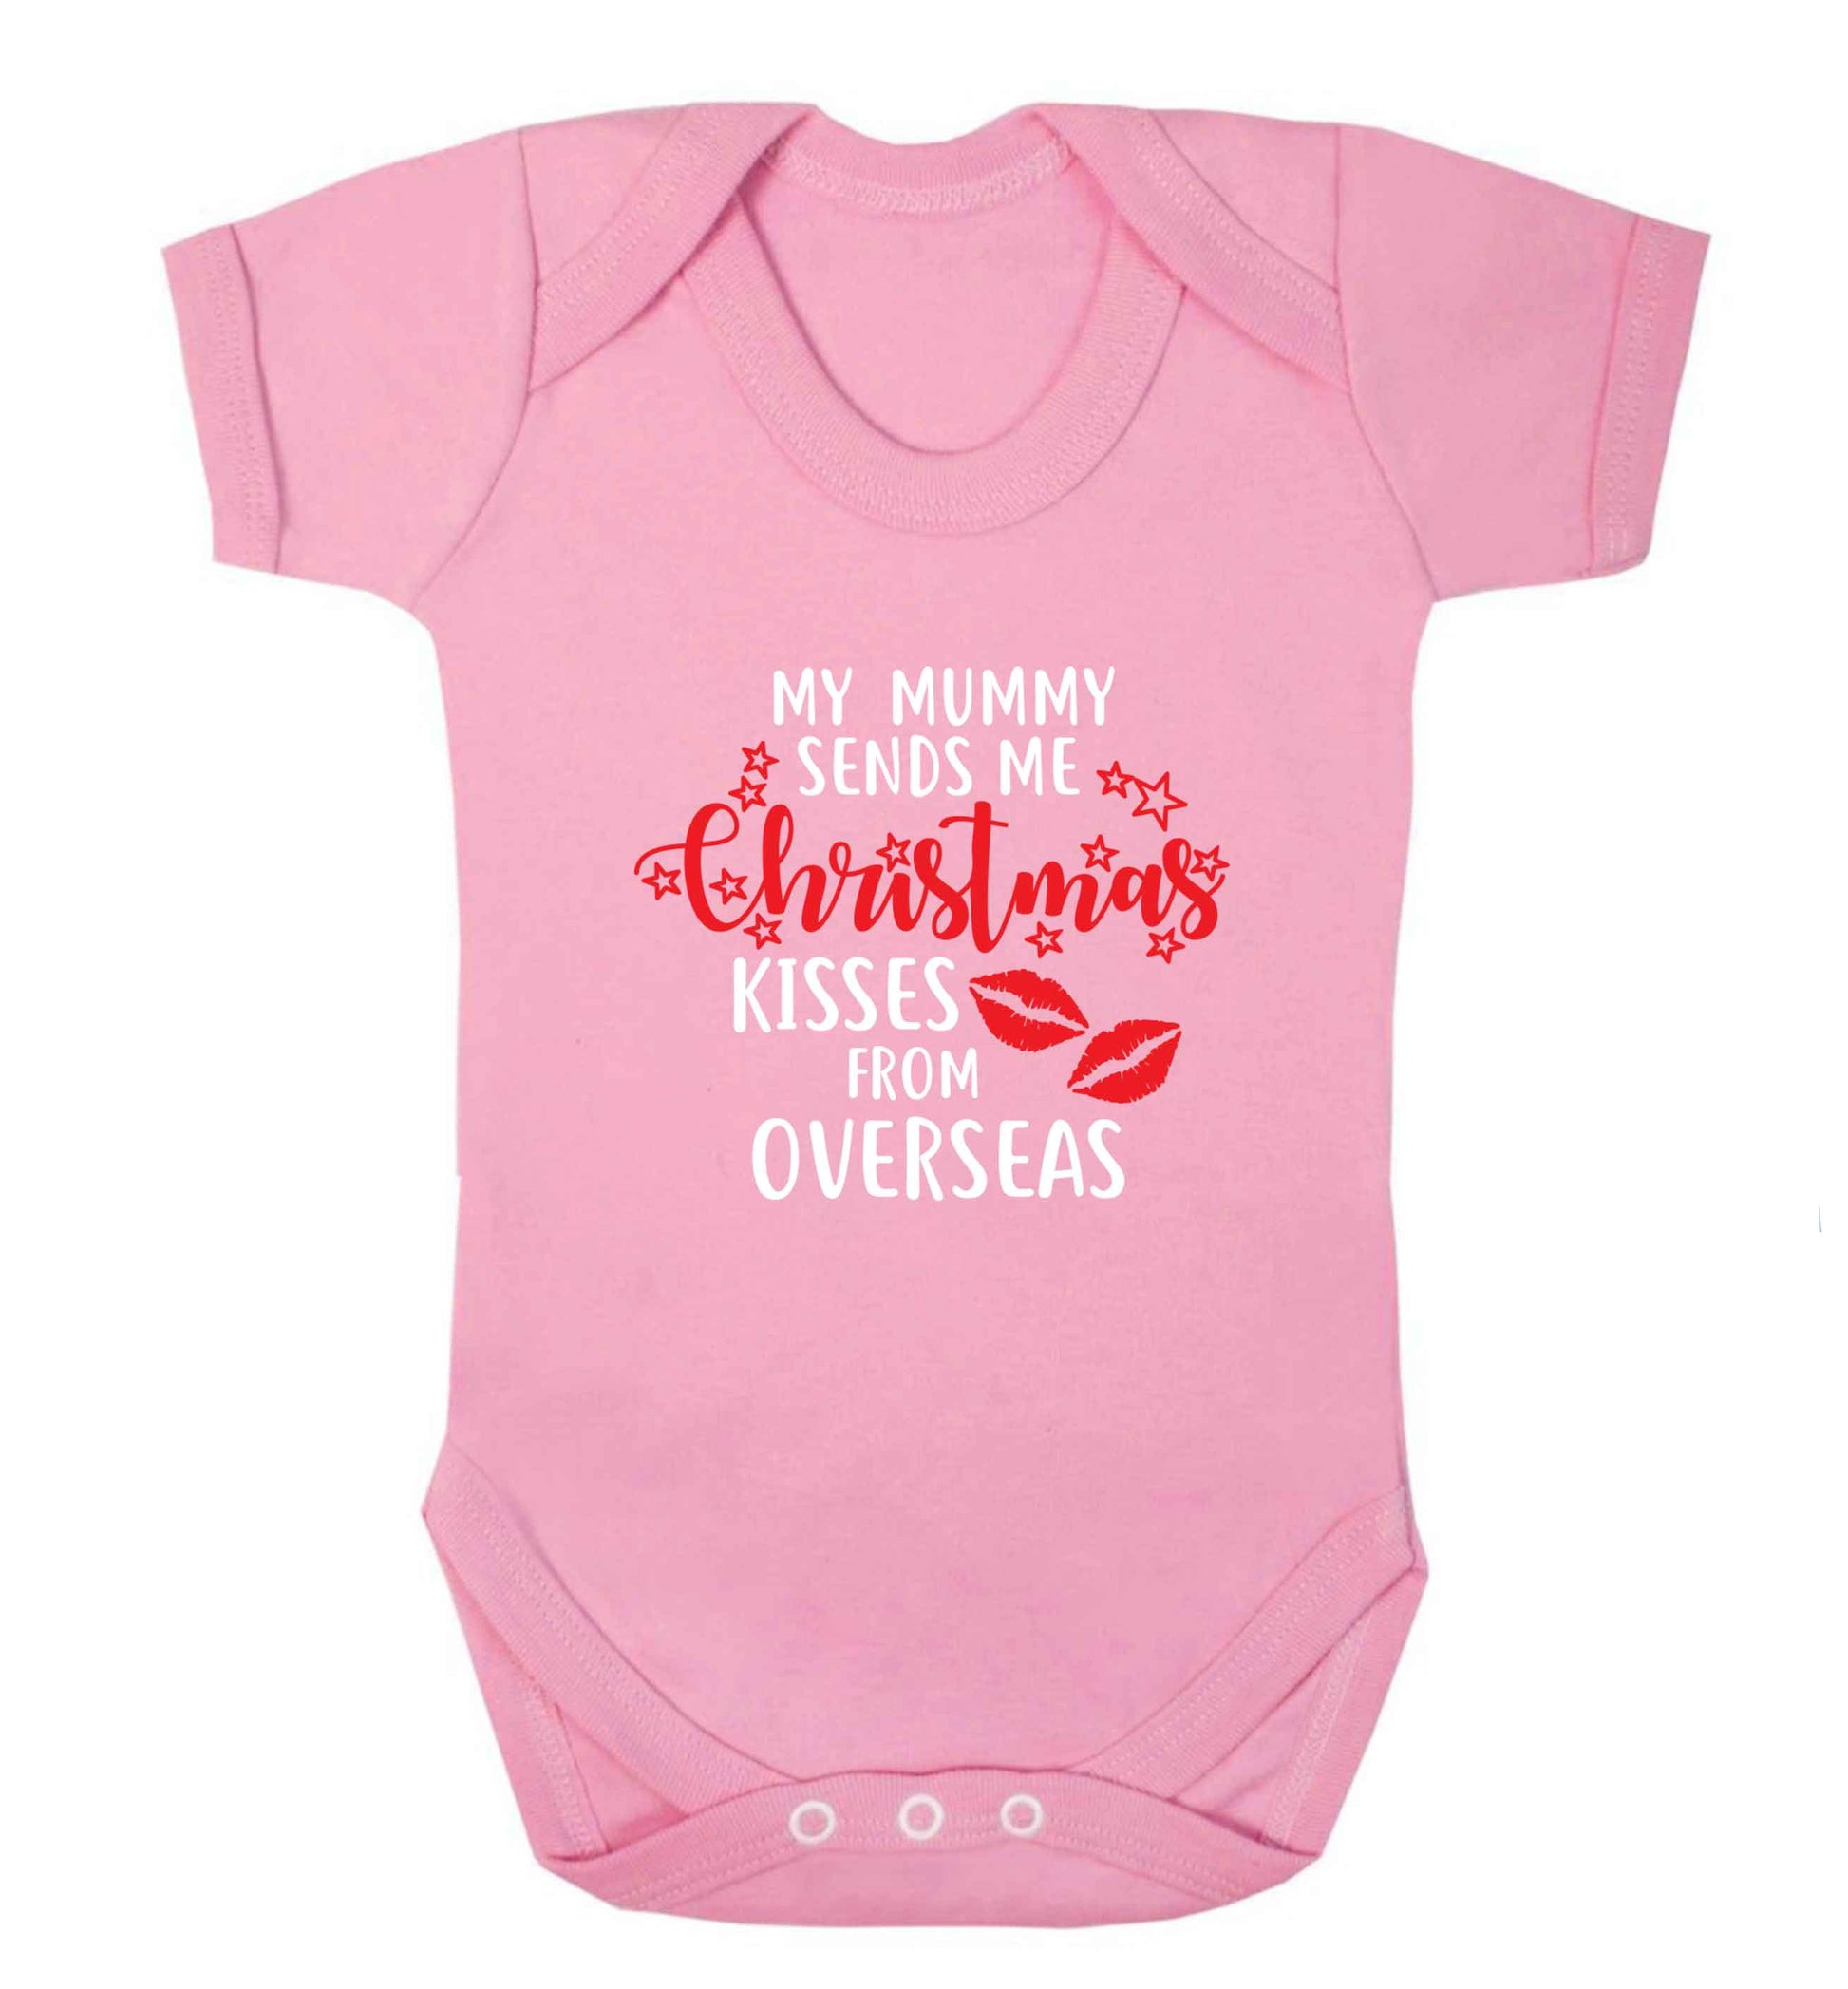 Mummy Christmas Kisses Overseas baby vest pale pink 18-24 months